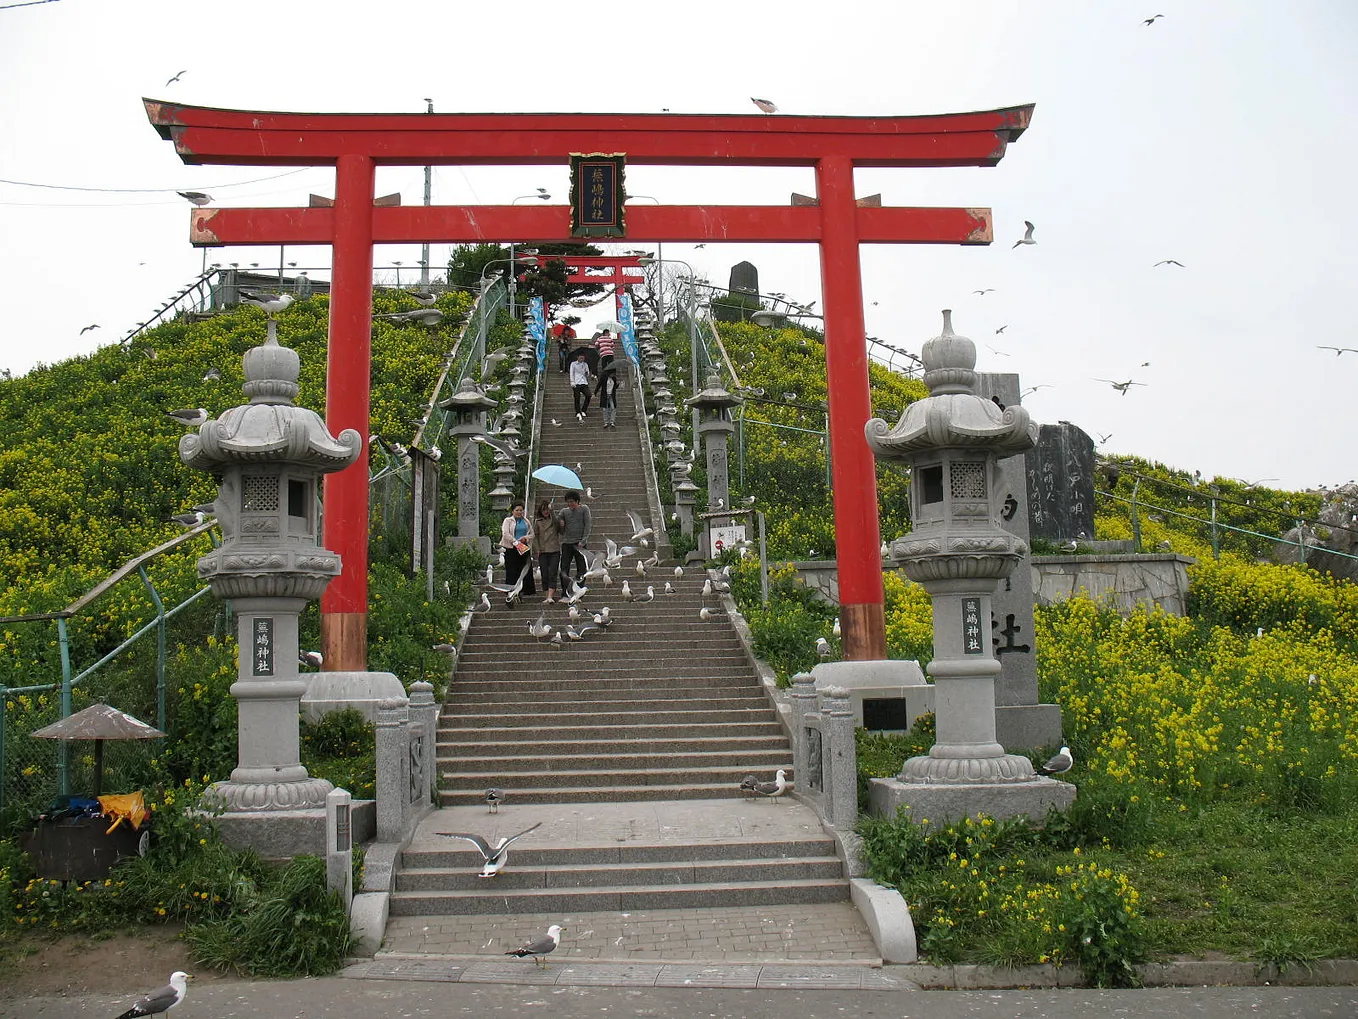 Steps leading up to a shrine at the top of the hill with surrounding gulls